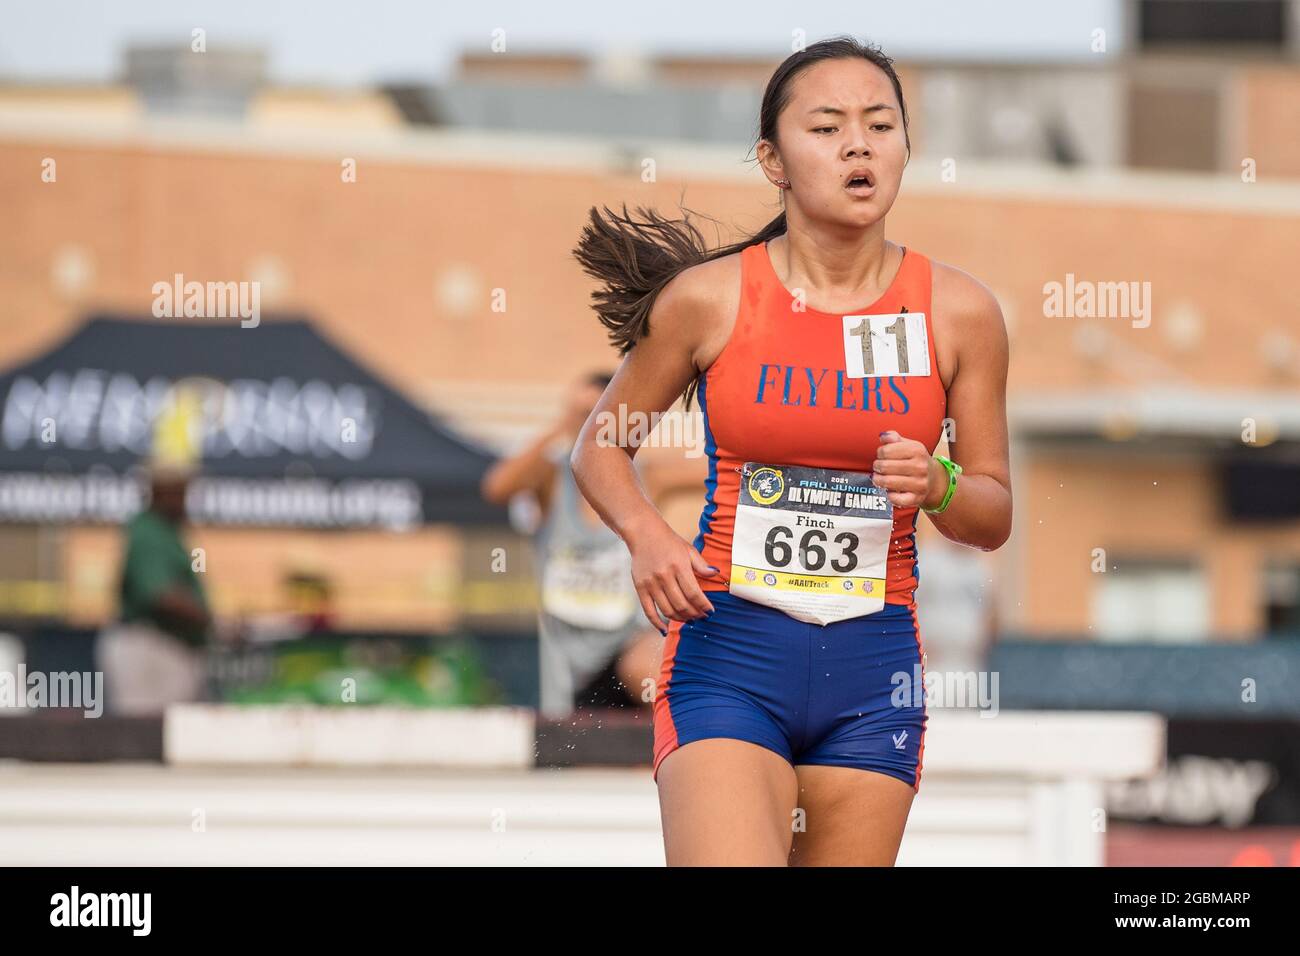 August 4, 2021: Hailey Finch competes in the Women's 2000 Meter Steeplechase 17-18 years old division in the 2021 AAU Junior Olympic Games at George Turner Stadium in Houston, Texas. Prentice C. James/CSM Stock Photo